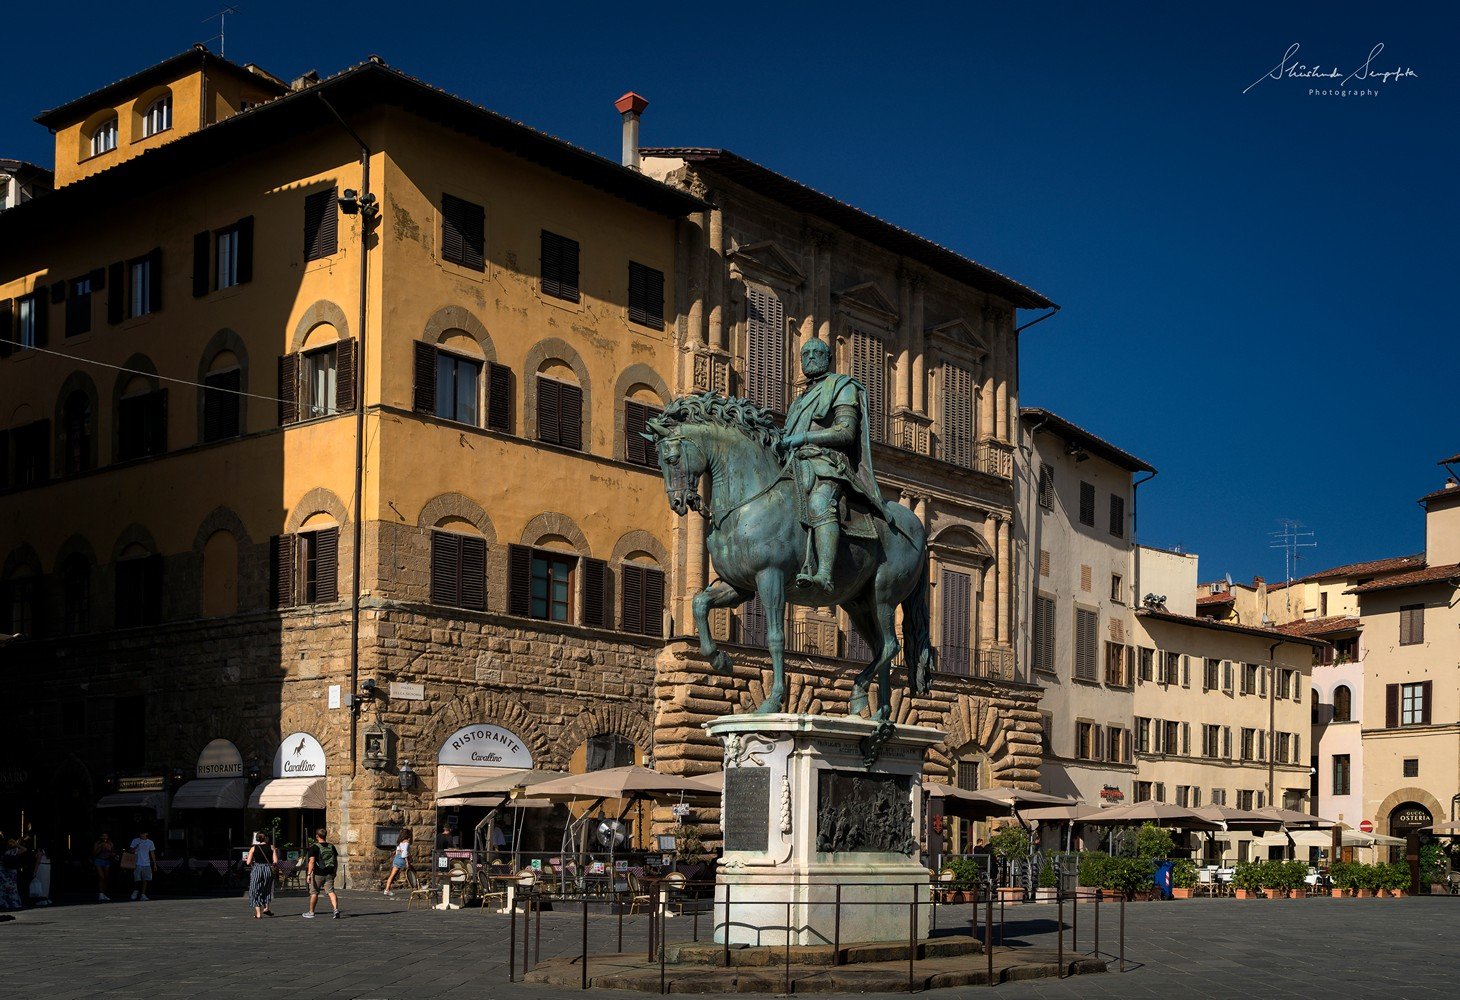 equestrian statue of Cosimo I di Medici in front of palazzo vecchio town hall situated on piazza del signoria in florence tuscany italy shot during summer